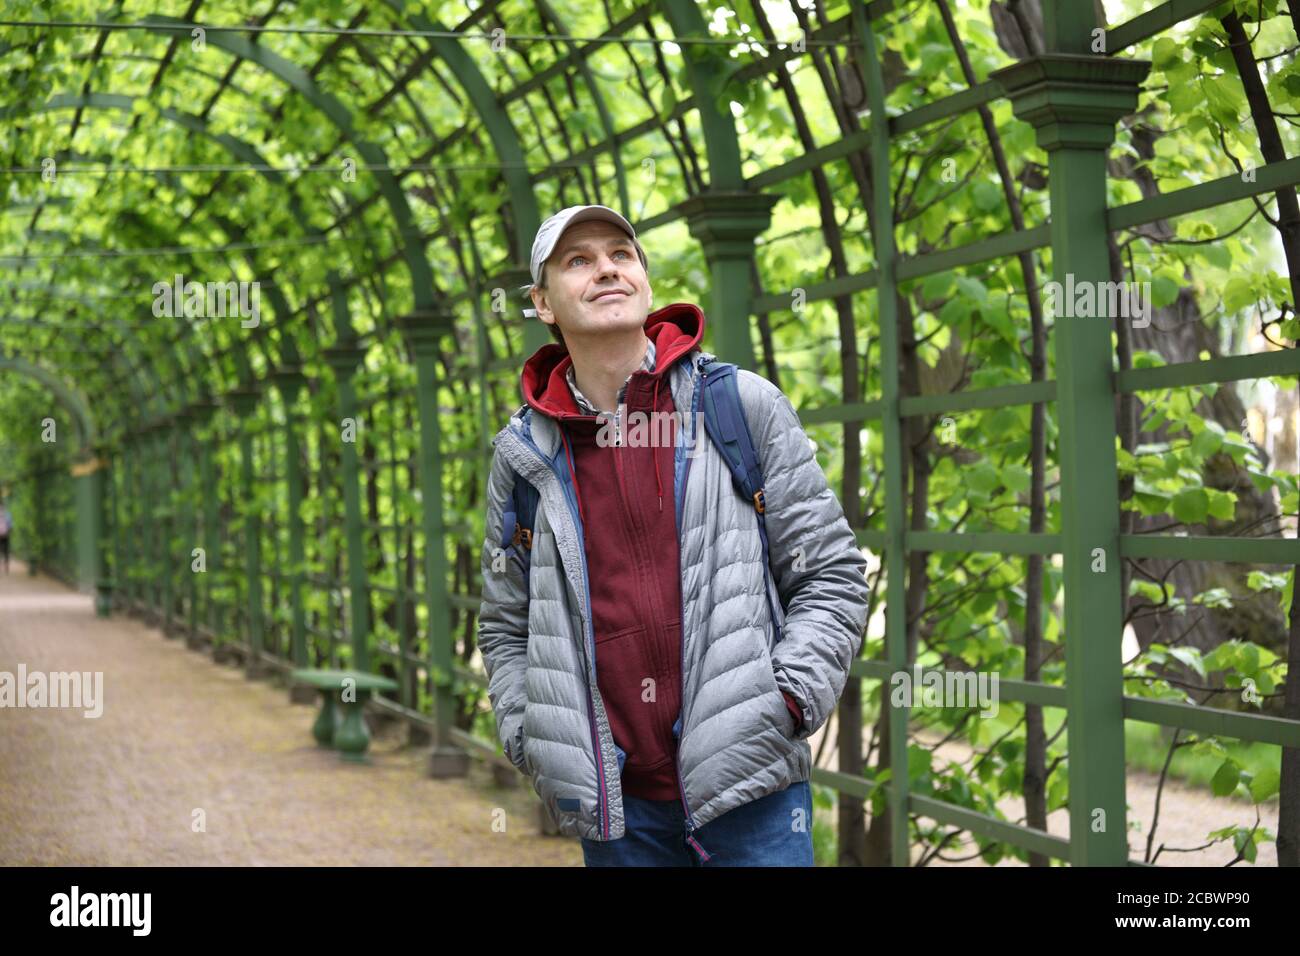 Mature Caucasian man with backpack in a city garden Stock Photo